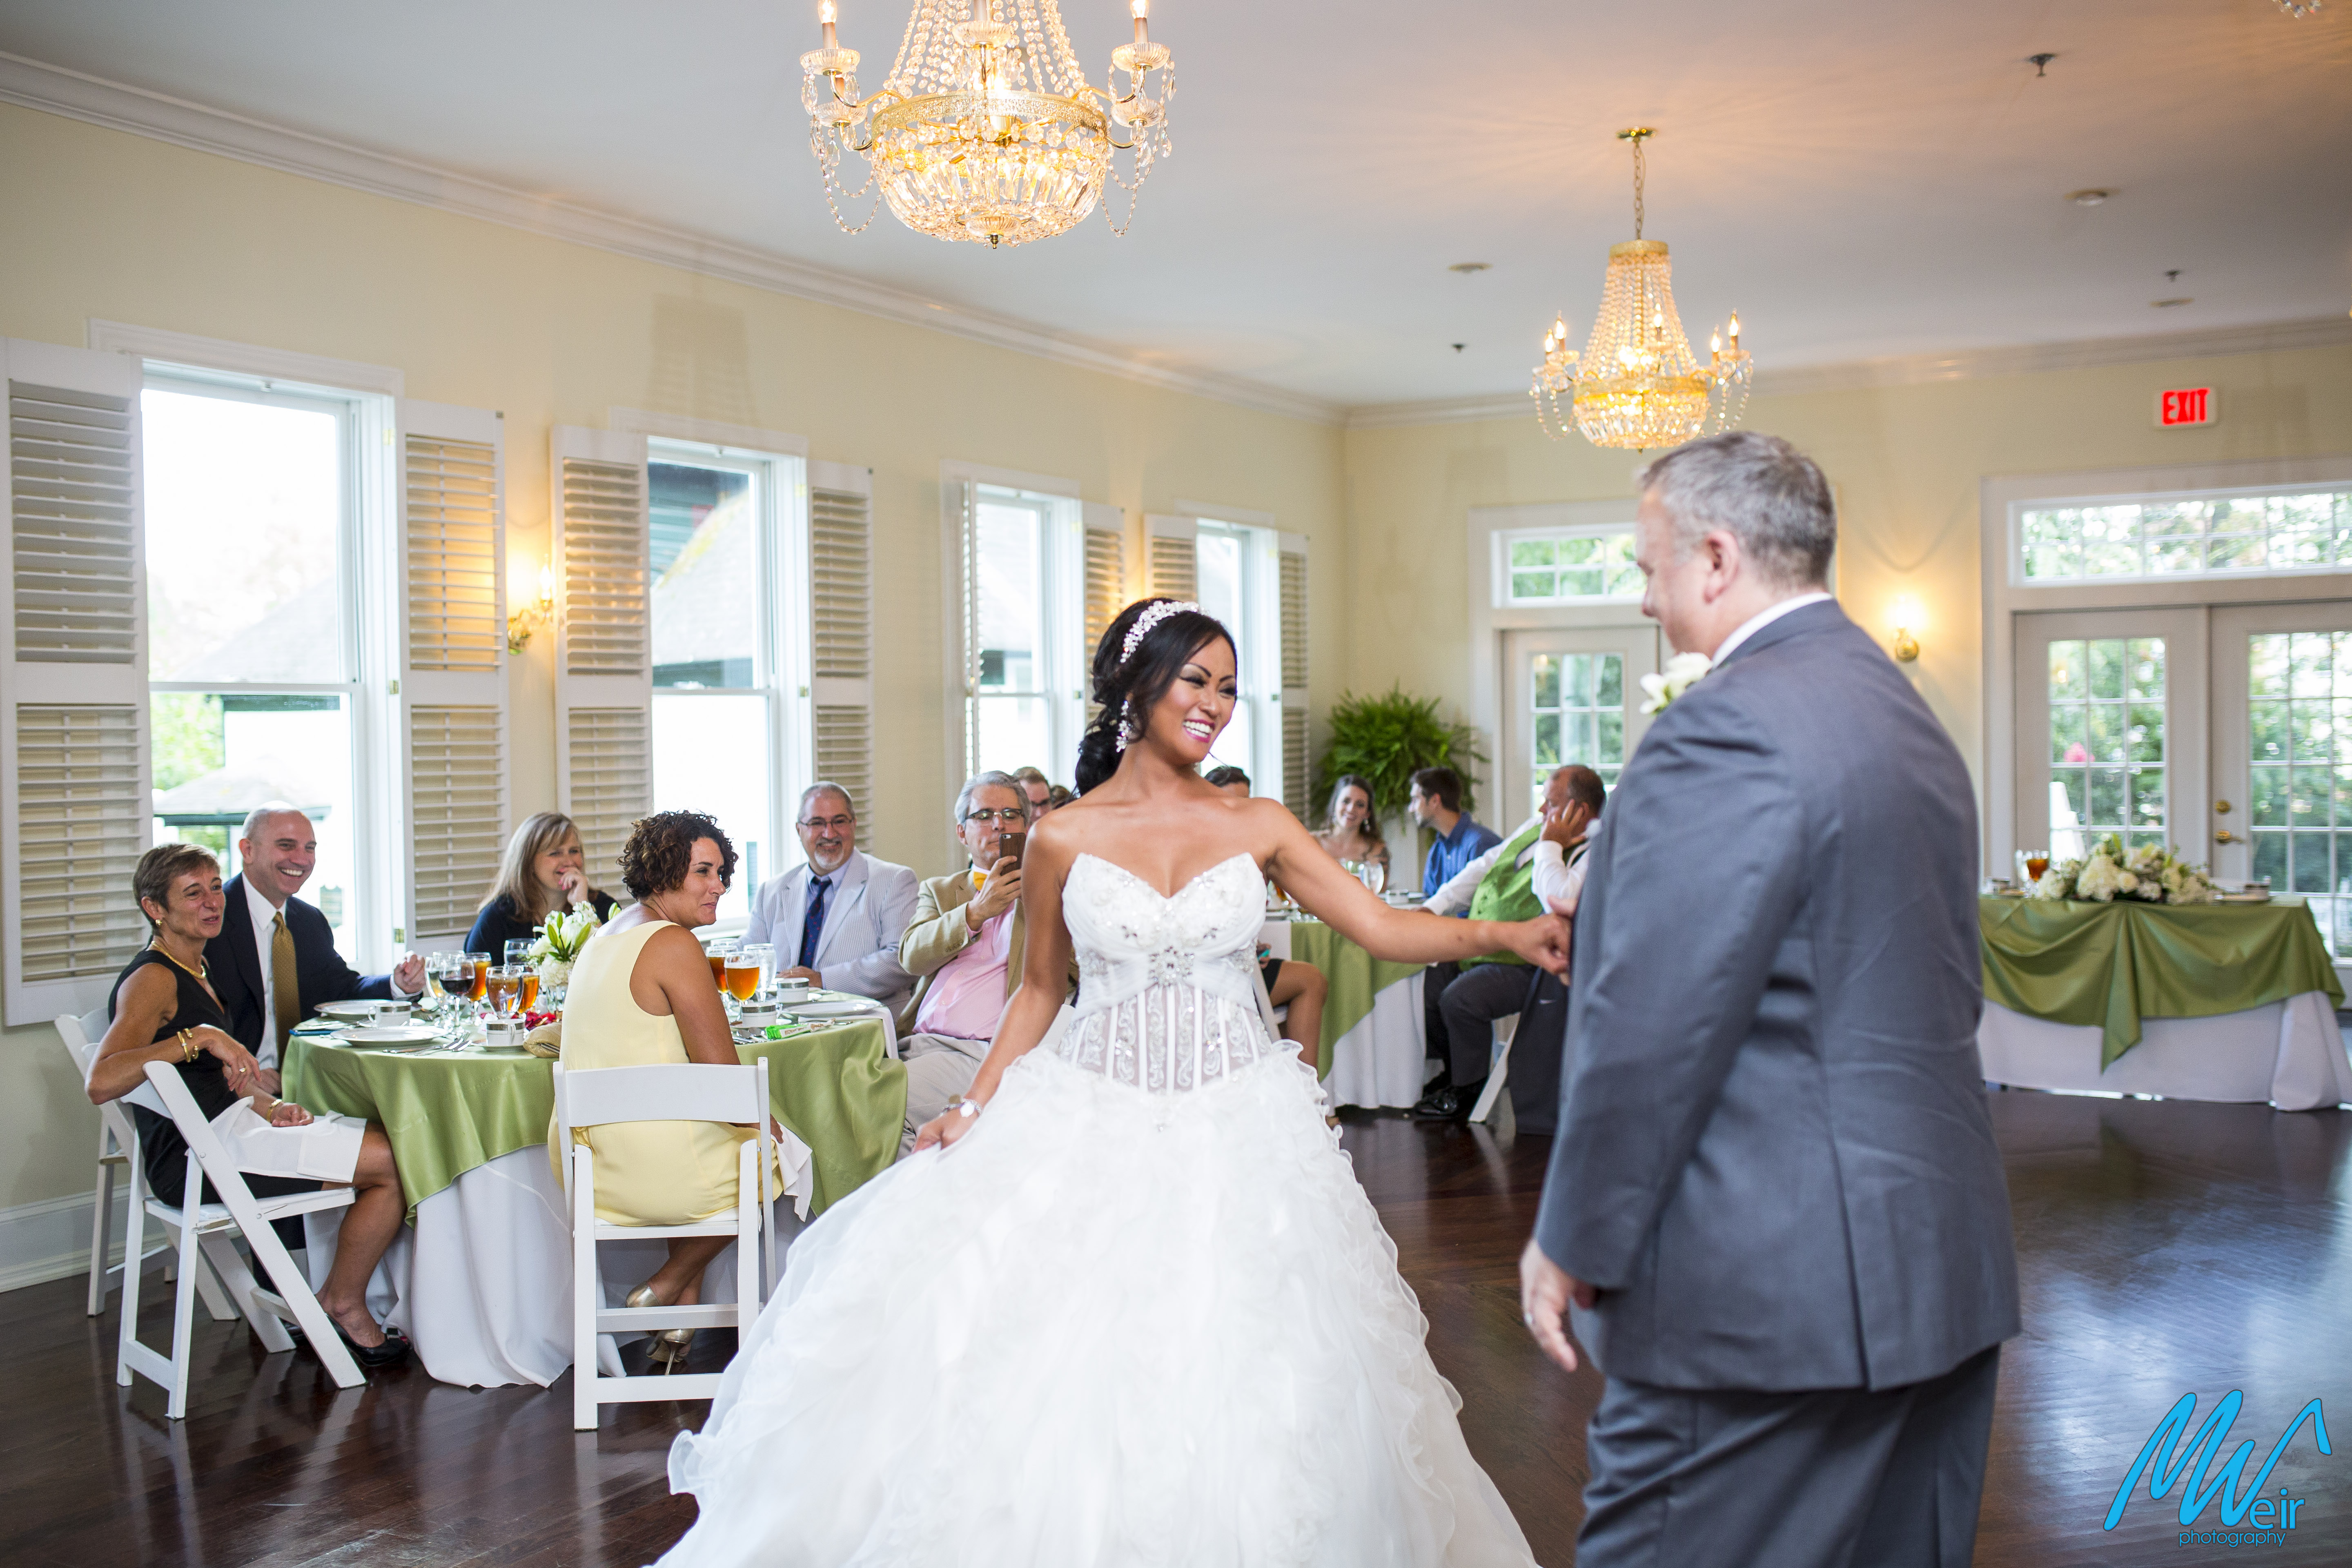 bride looks like a princess as her new husband twirls her during first dance